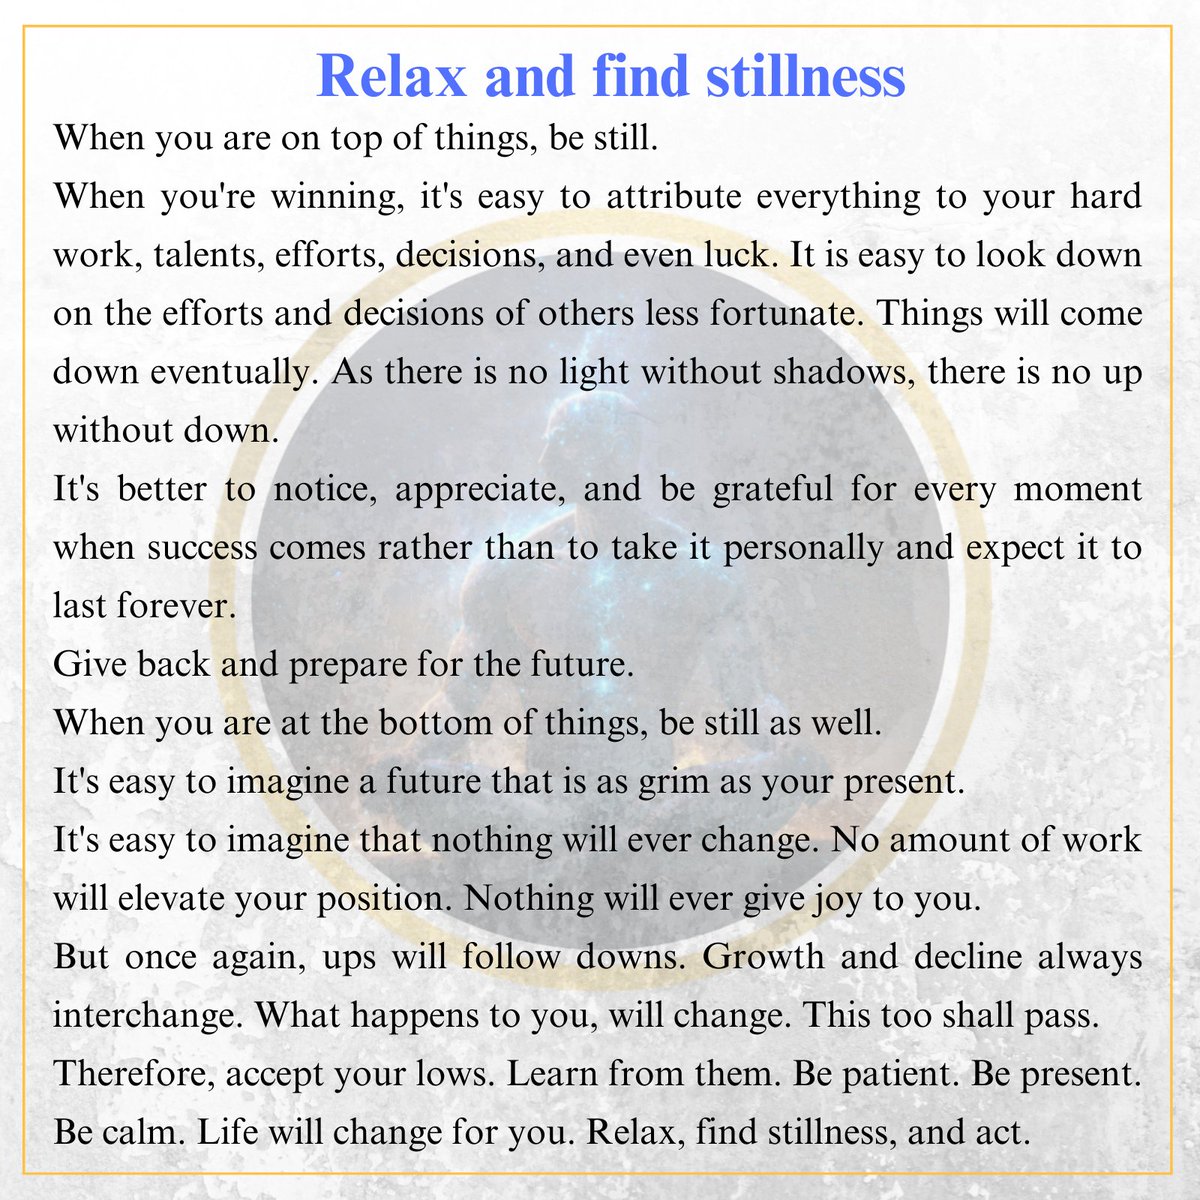 Relax and be still: